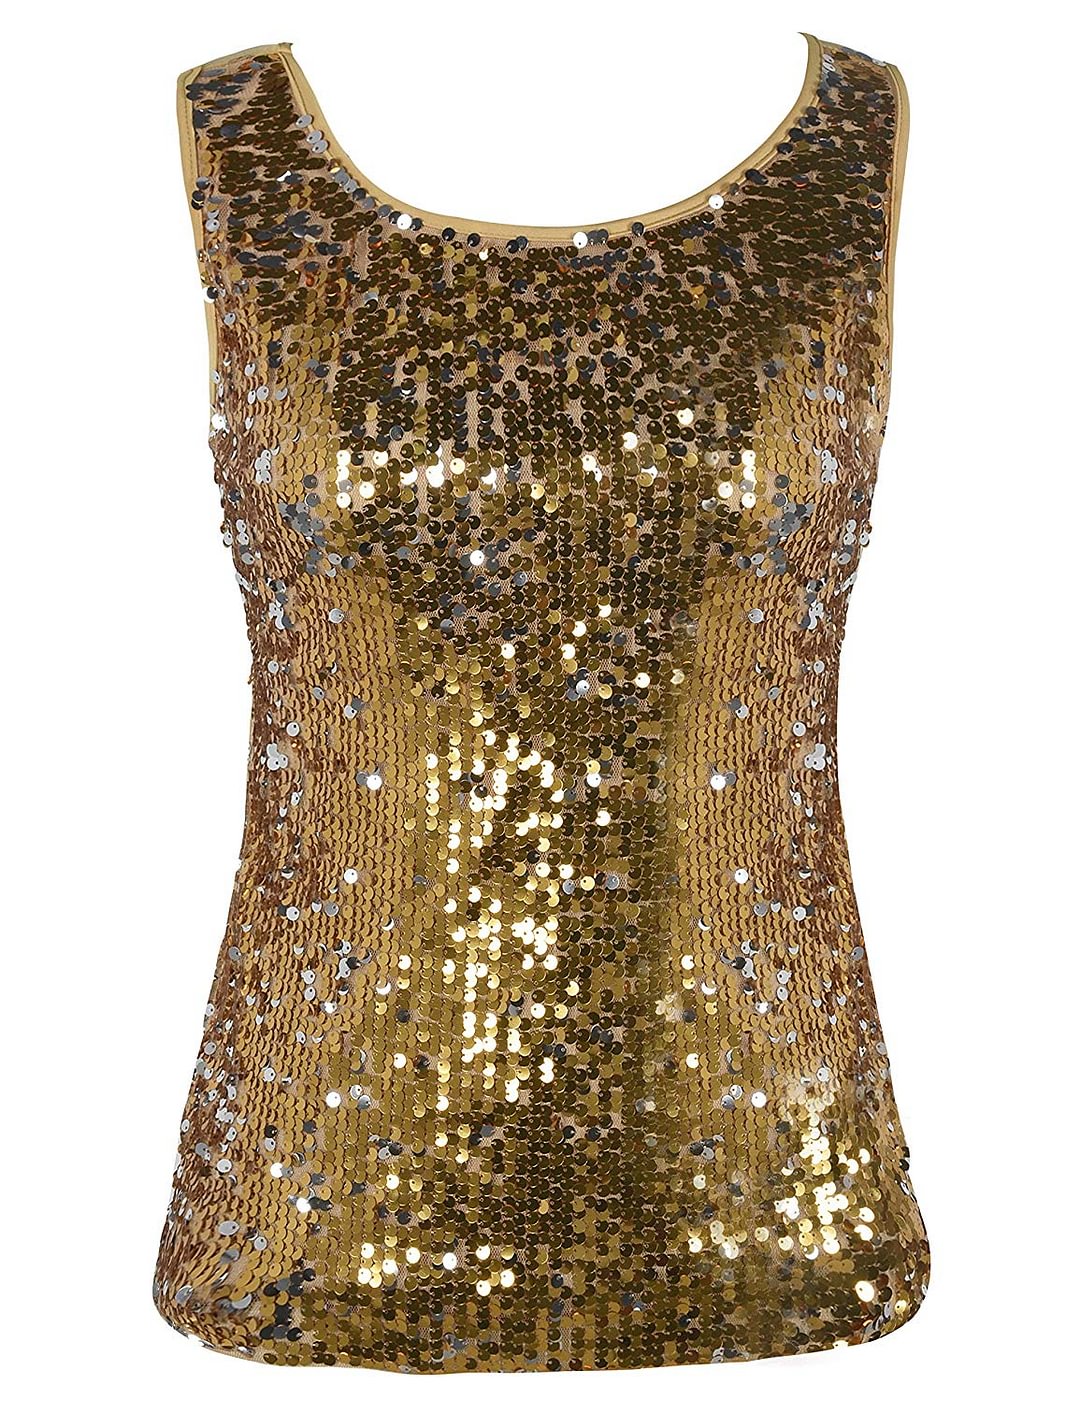 Women's Sequin Top Slim Stretchy Sparkle Tank Top Party Top (10 / 12 Gold)